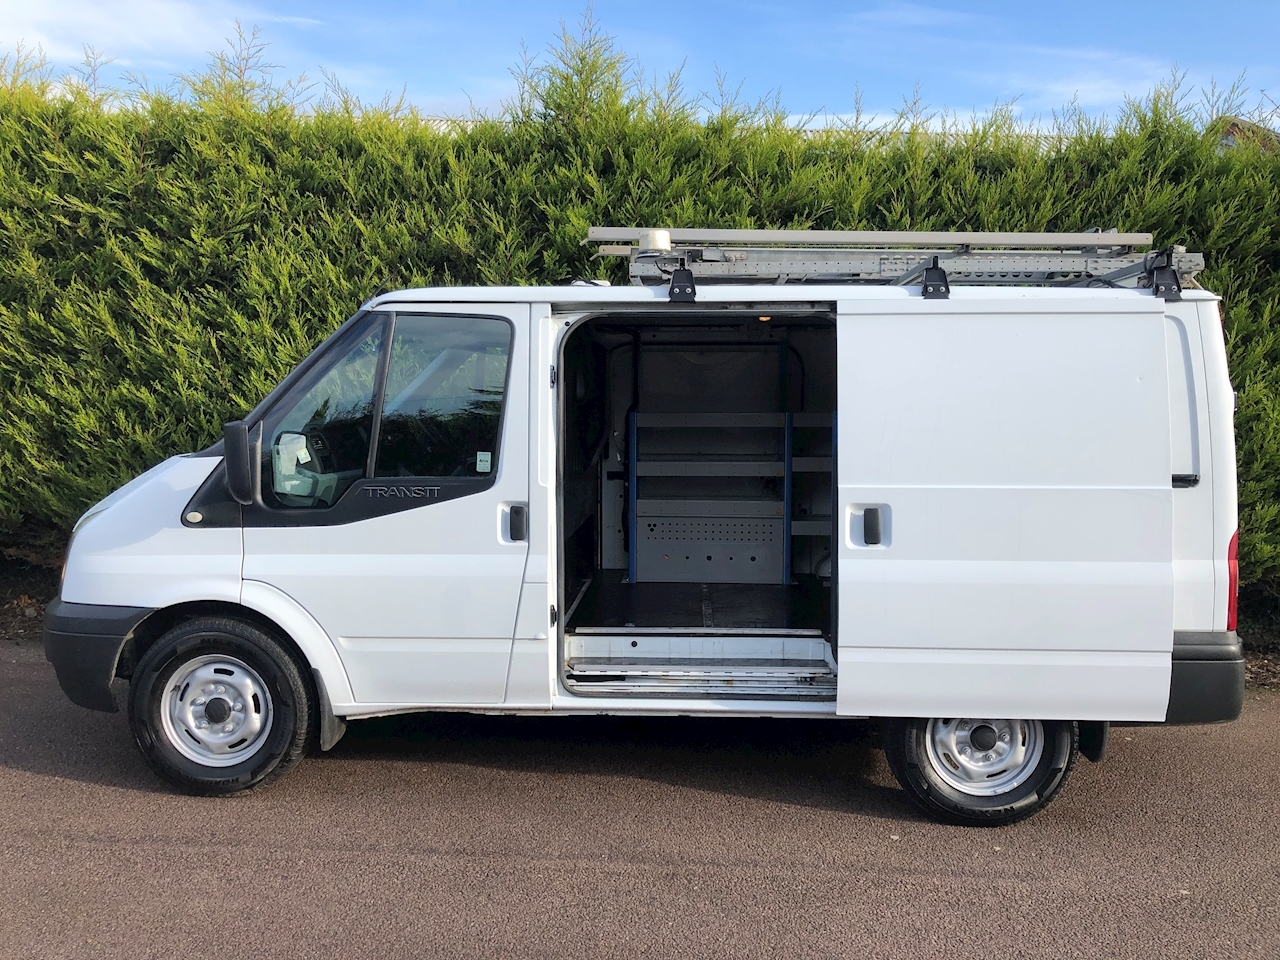 awd vans for sale uk